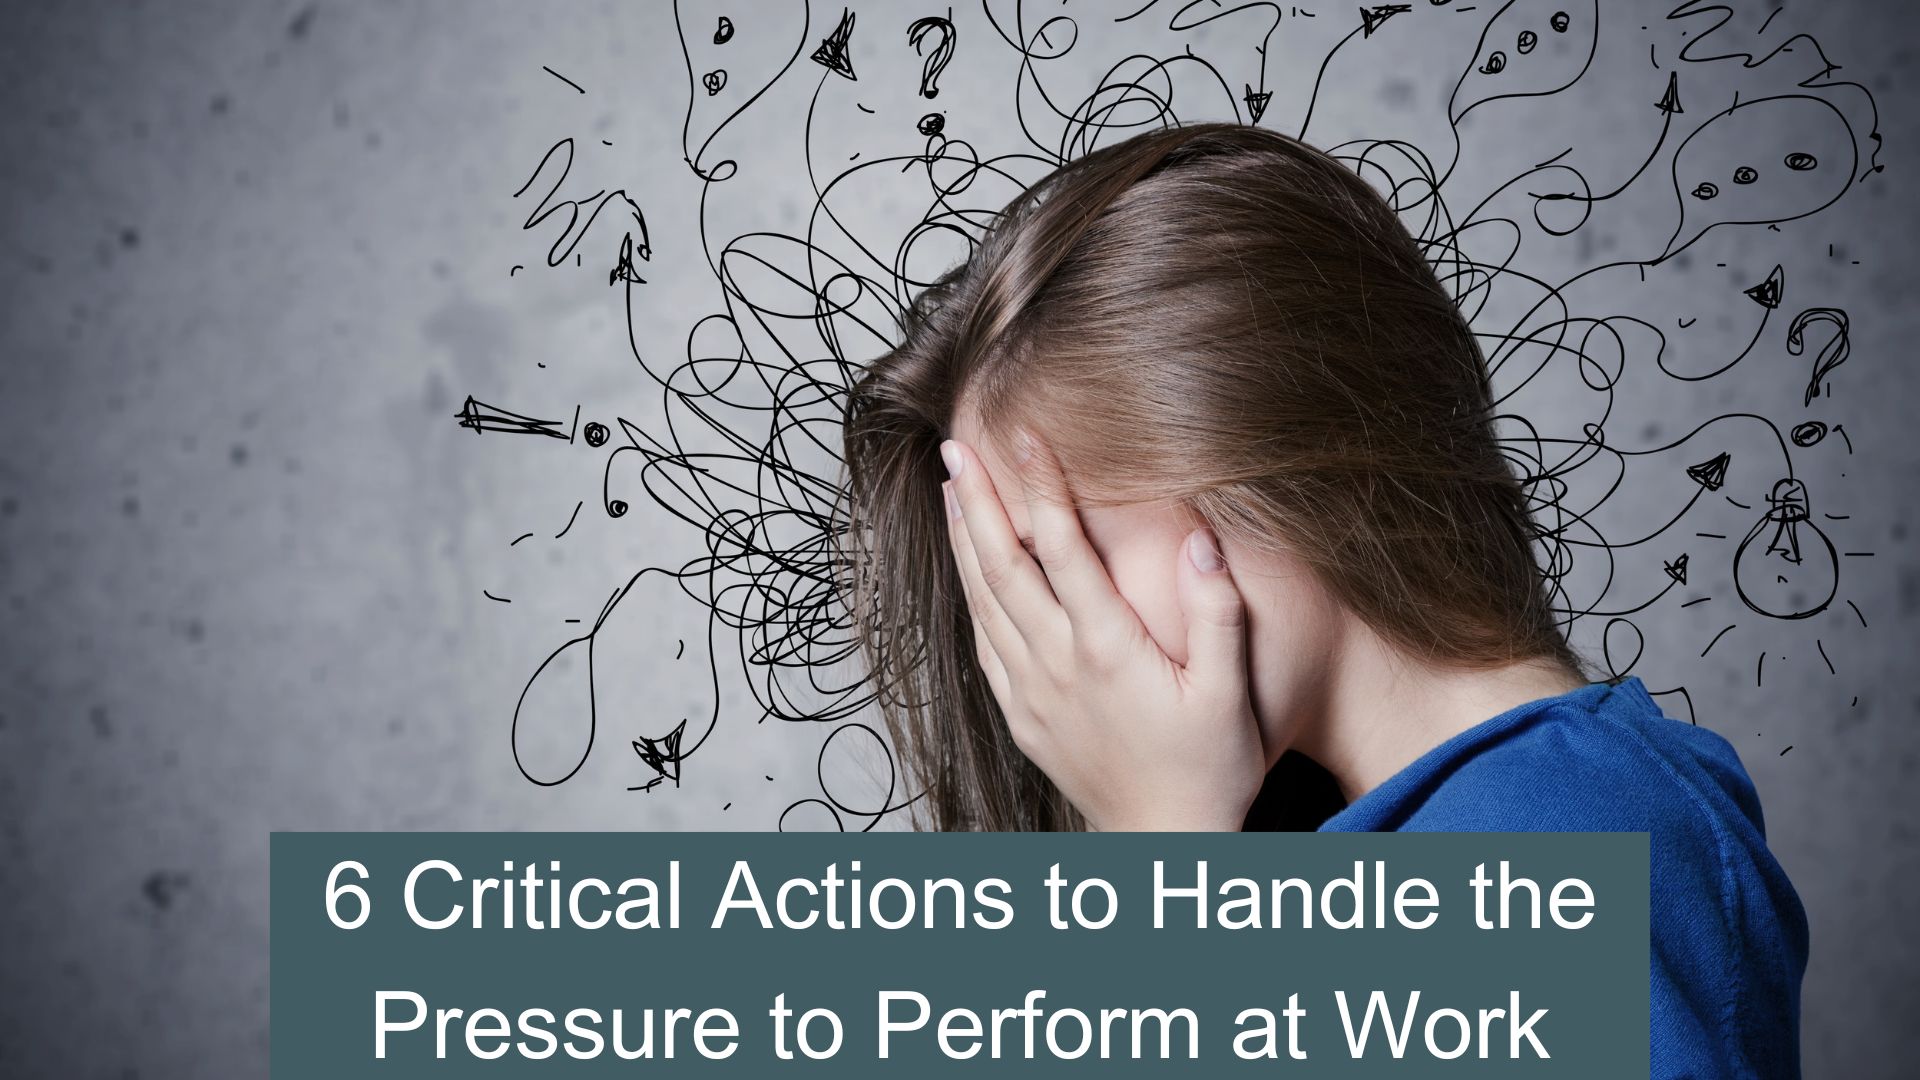 6 Critical Actions to Handle the Pressure to Perform at Work